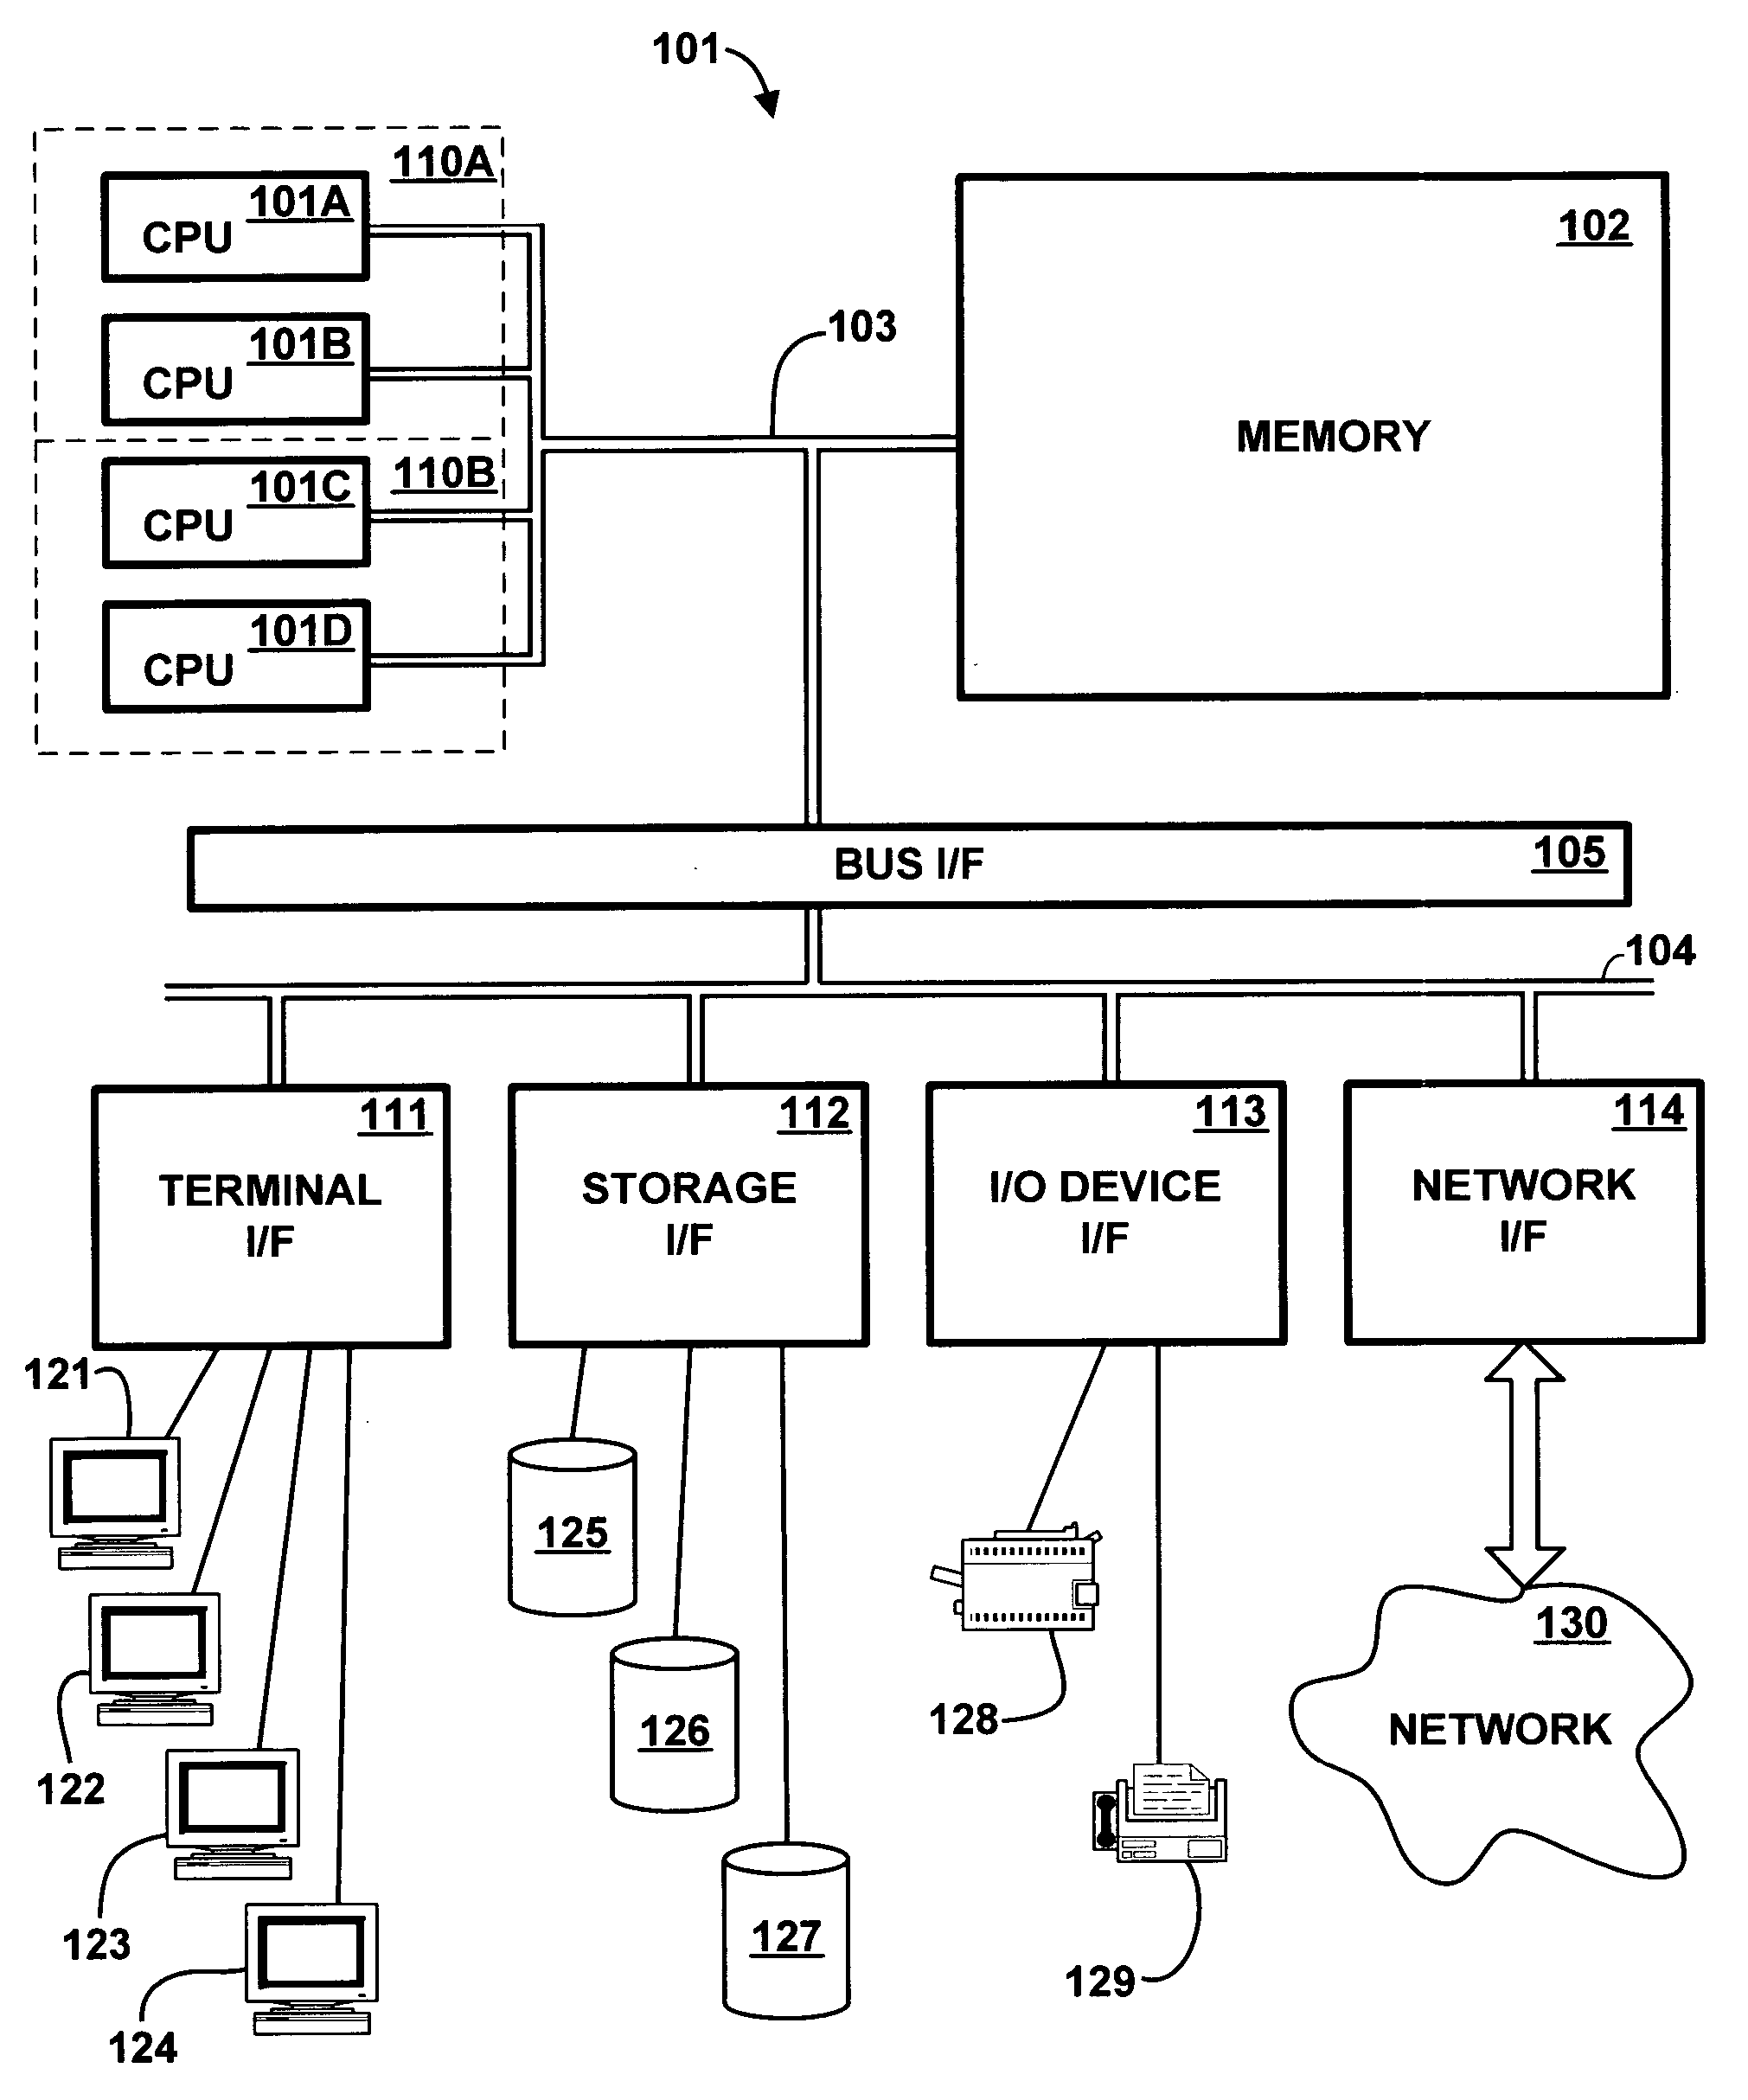 Multiple processor core device having shareable functional units for self-repairing capability